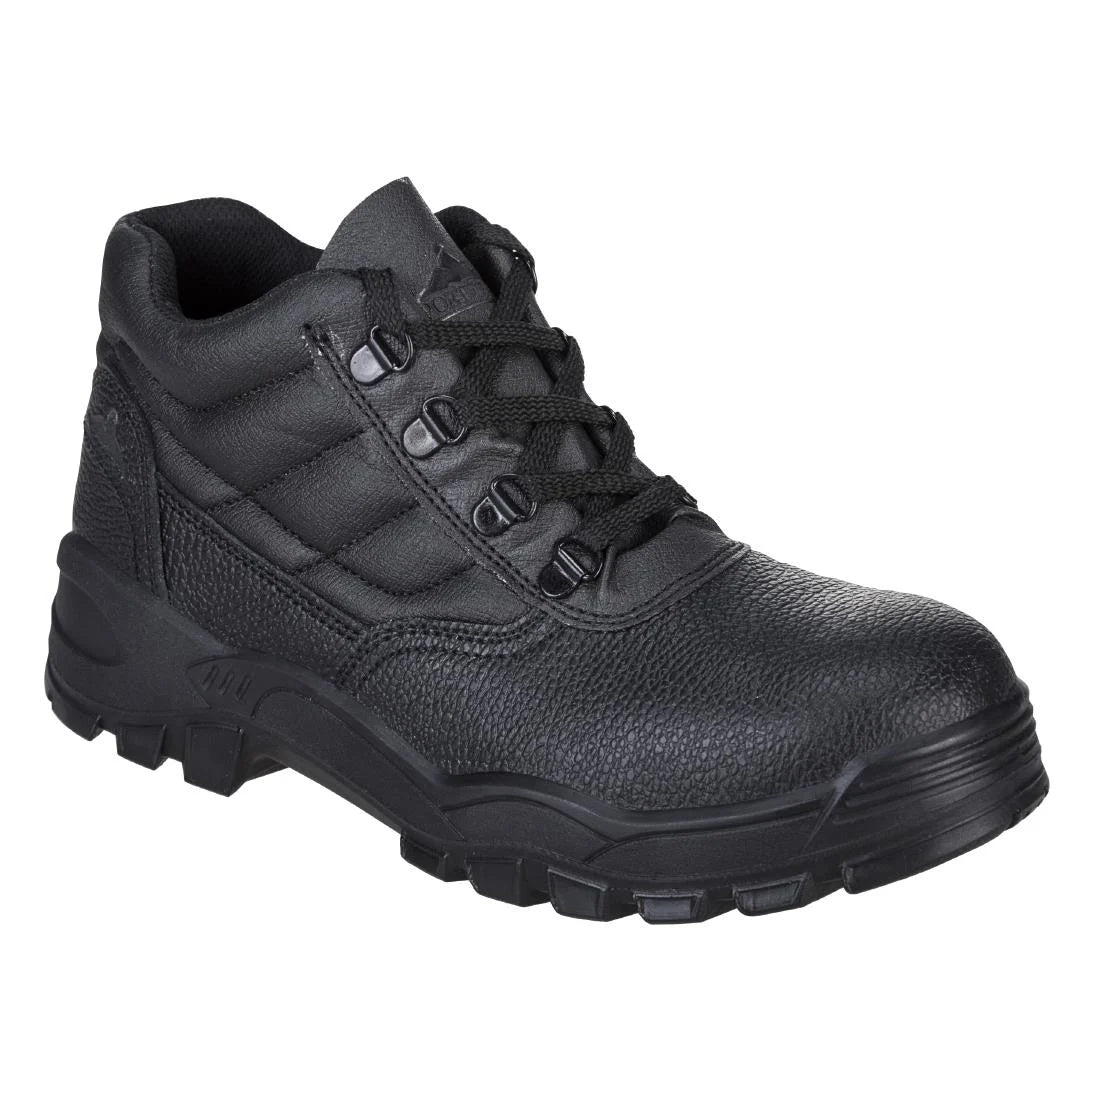 BA059-42 Portwest Protector Boot S1P Black Size 42 JD Catering Equipment Solutions Ltd